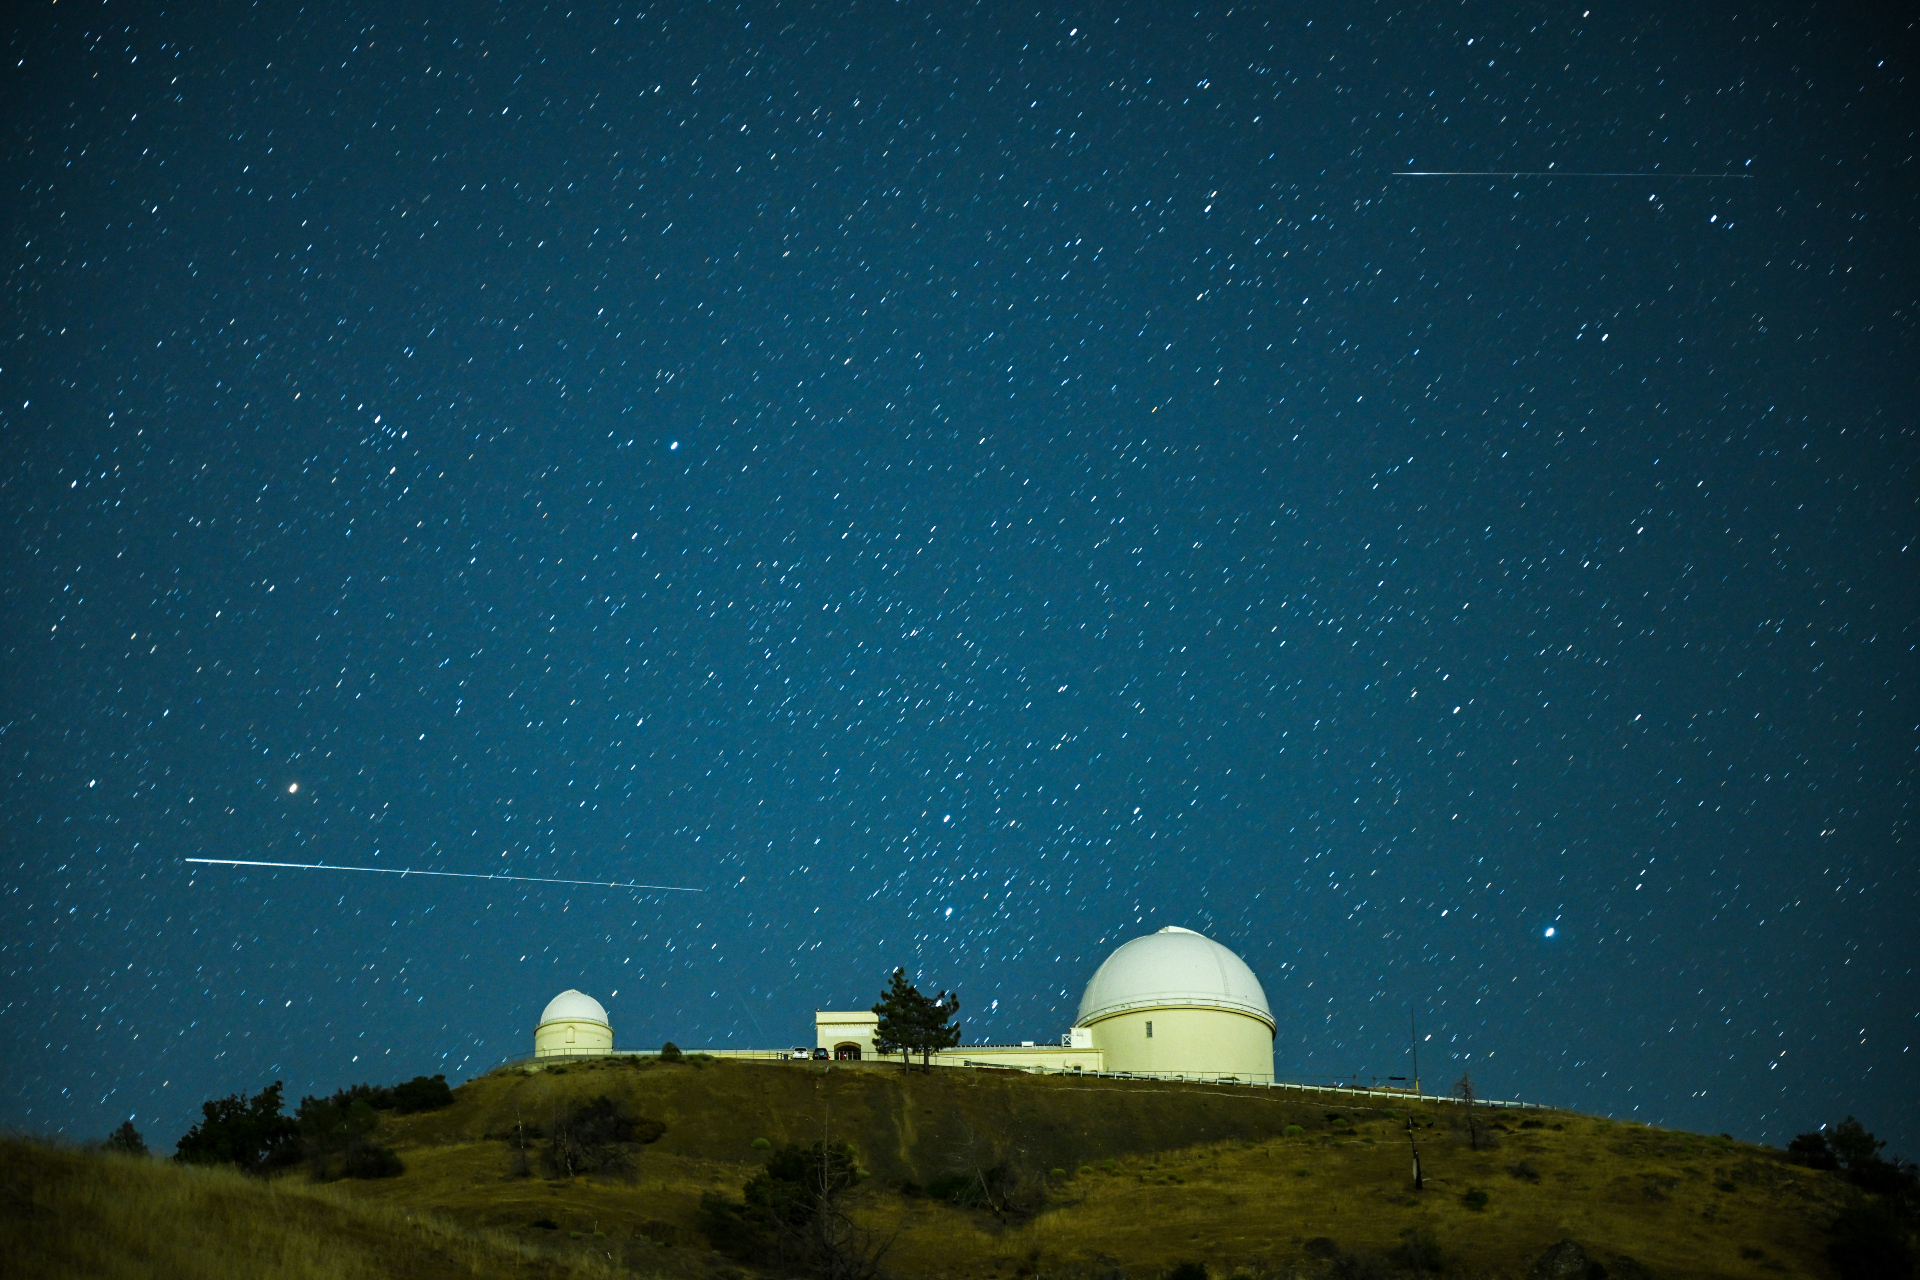 A long white train of the Perseid meteor passes over the domed structure of the Lake Observatory in a horizontal direction against a starry sky.